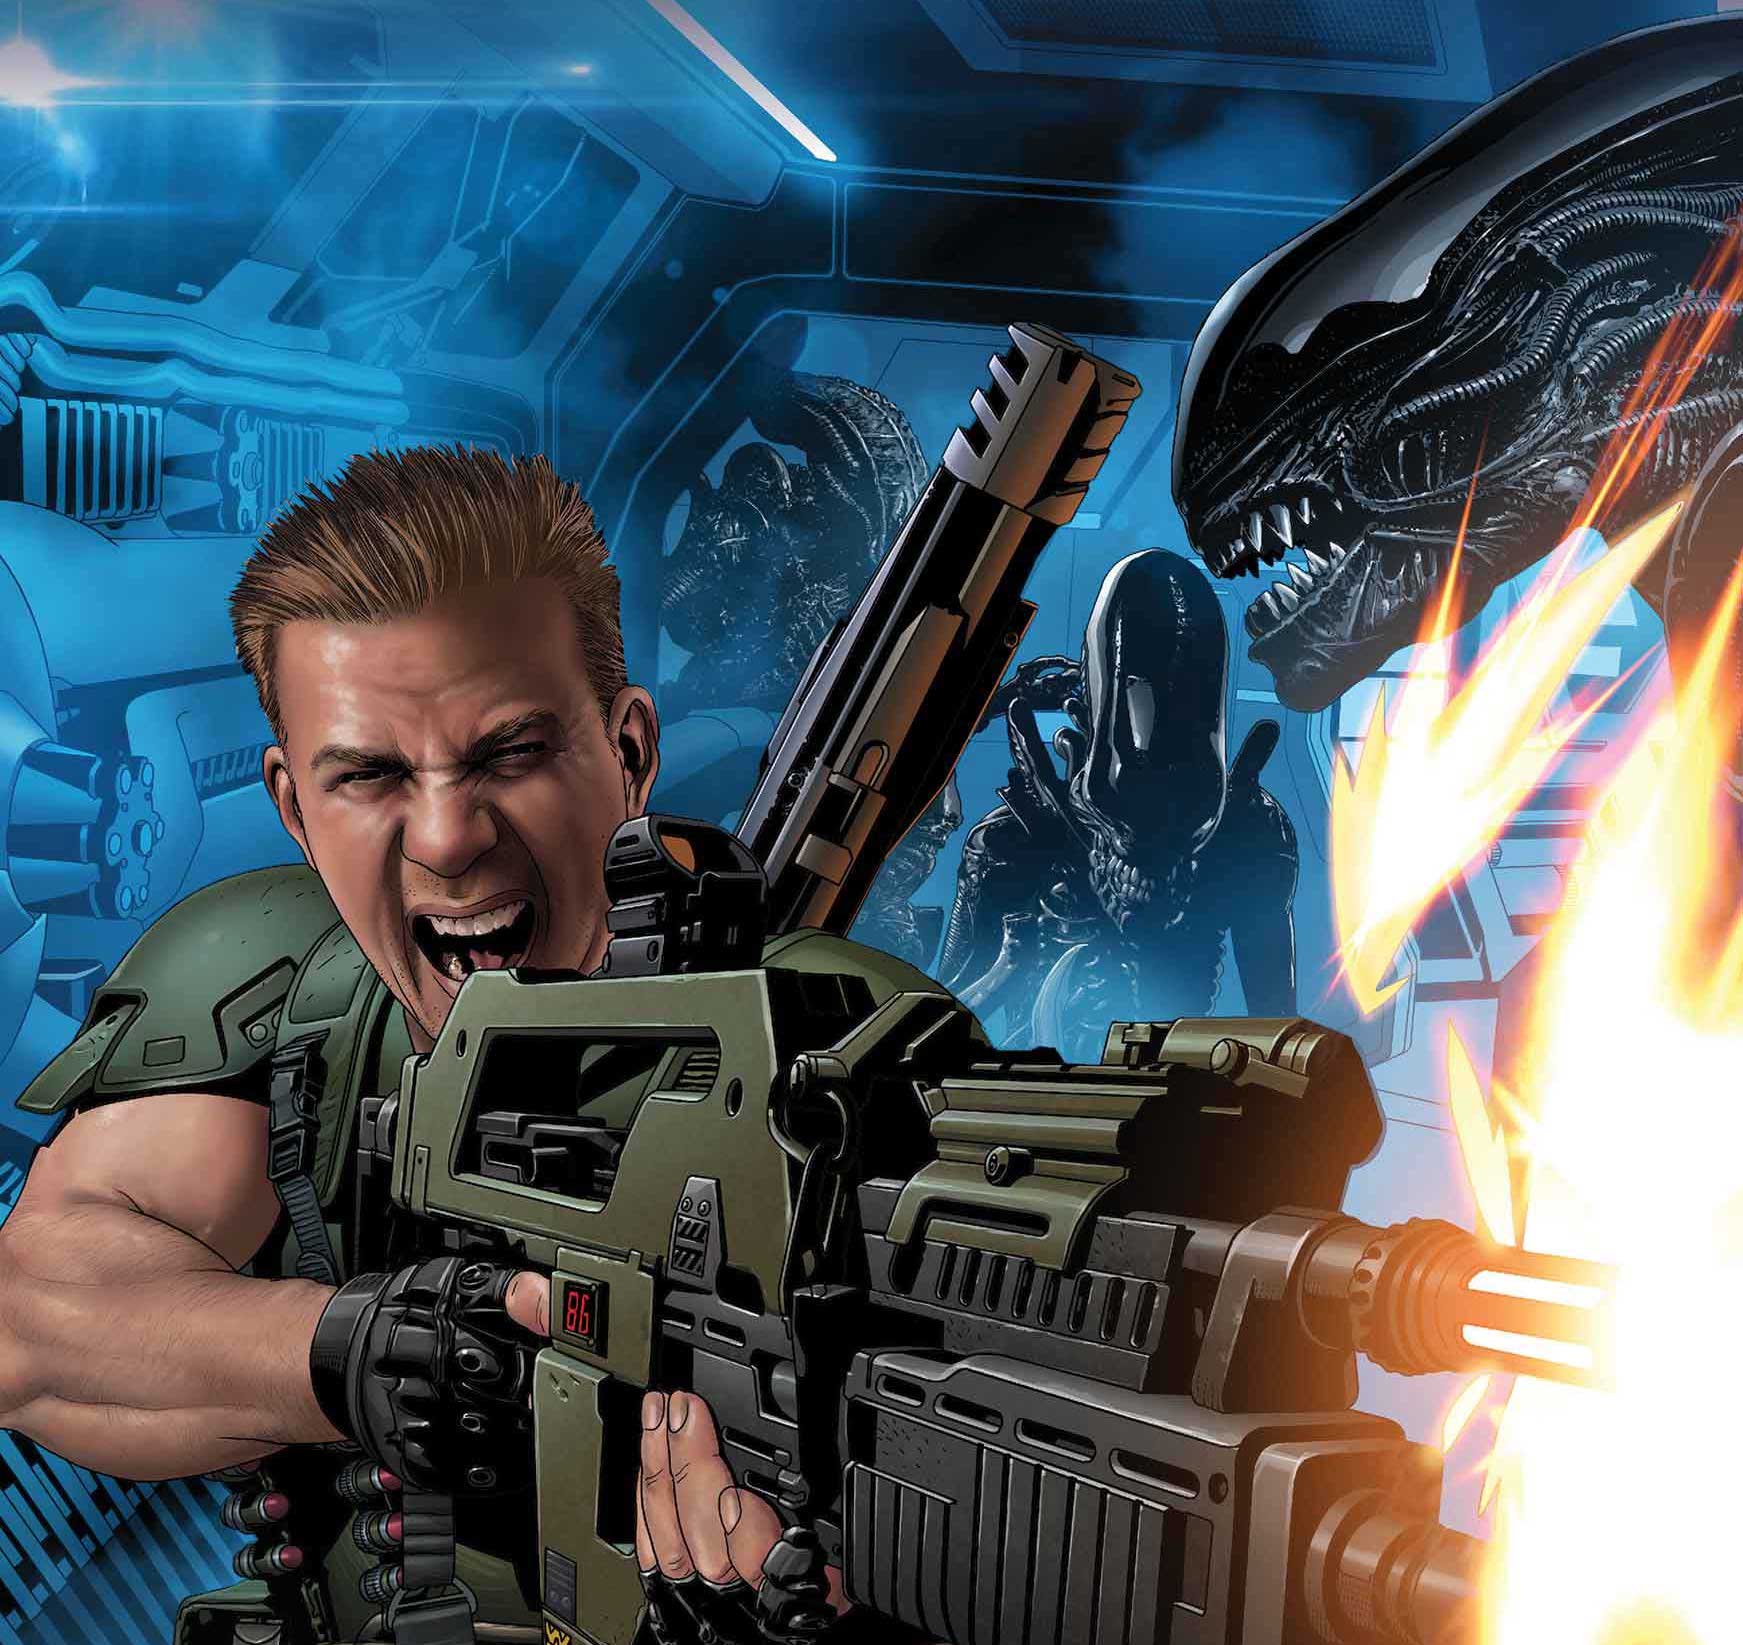 'Alien Annual' #1 wraps up Johnson and Larroca's first-era on the series